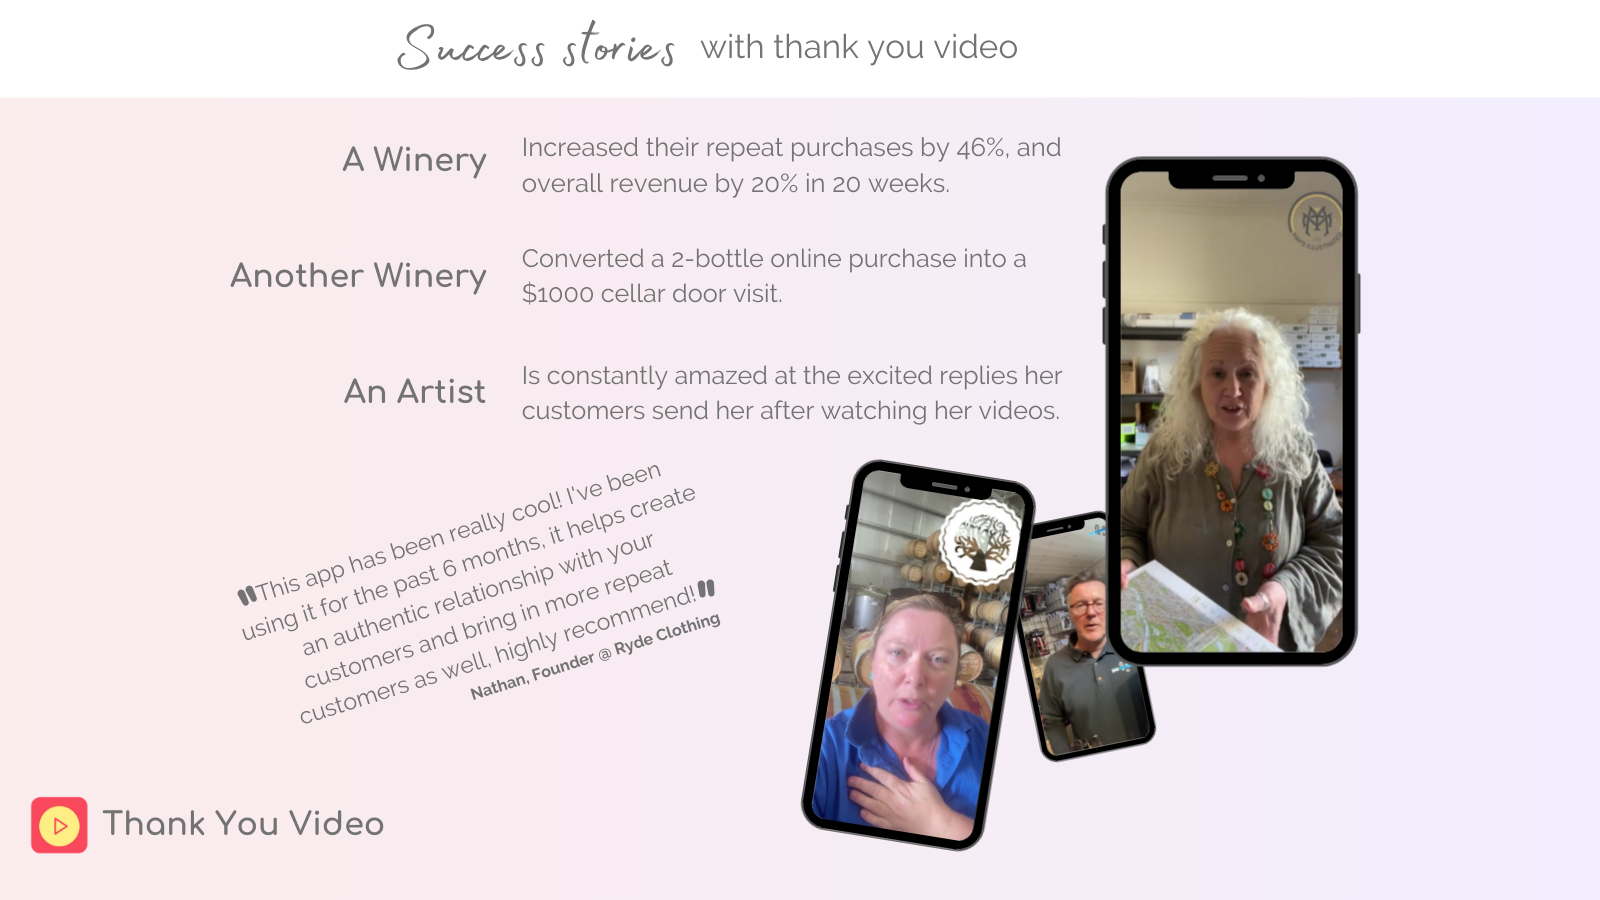 Success stories with thank you video